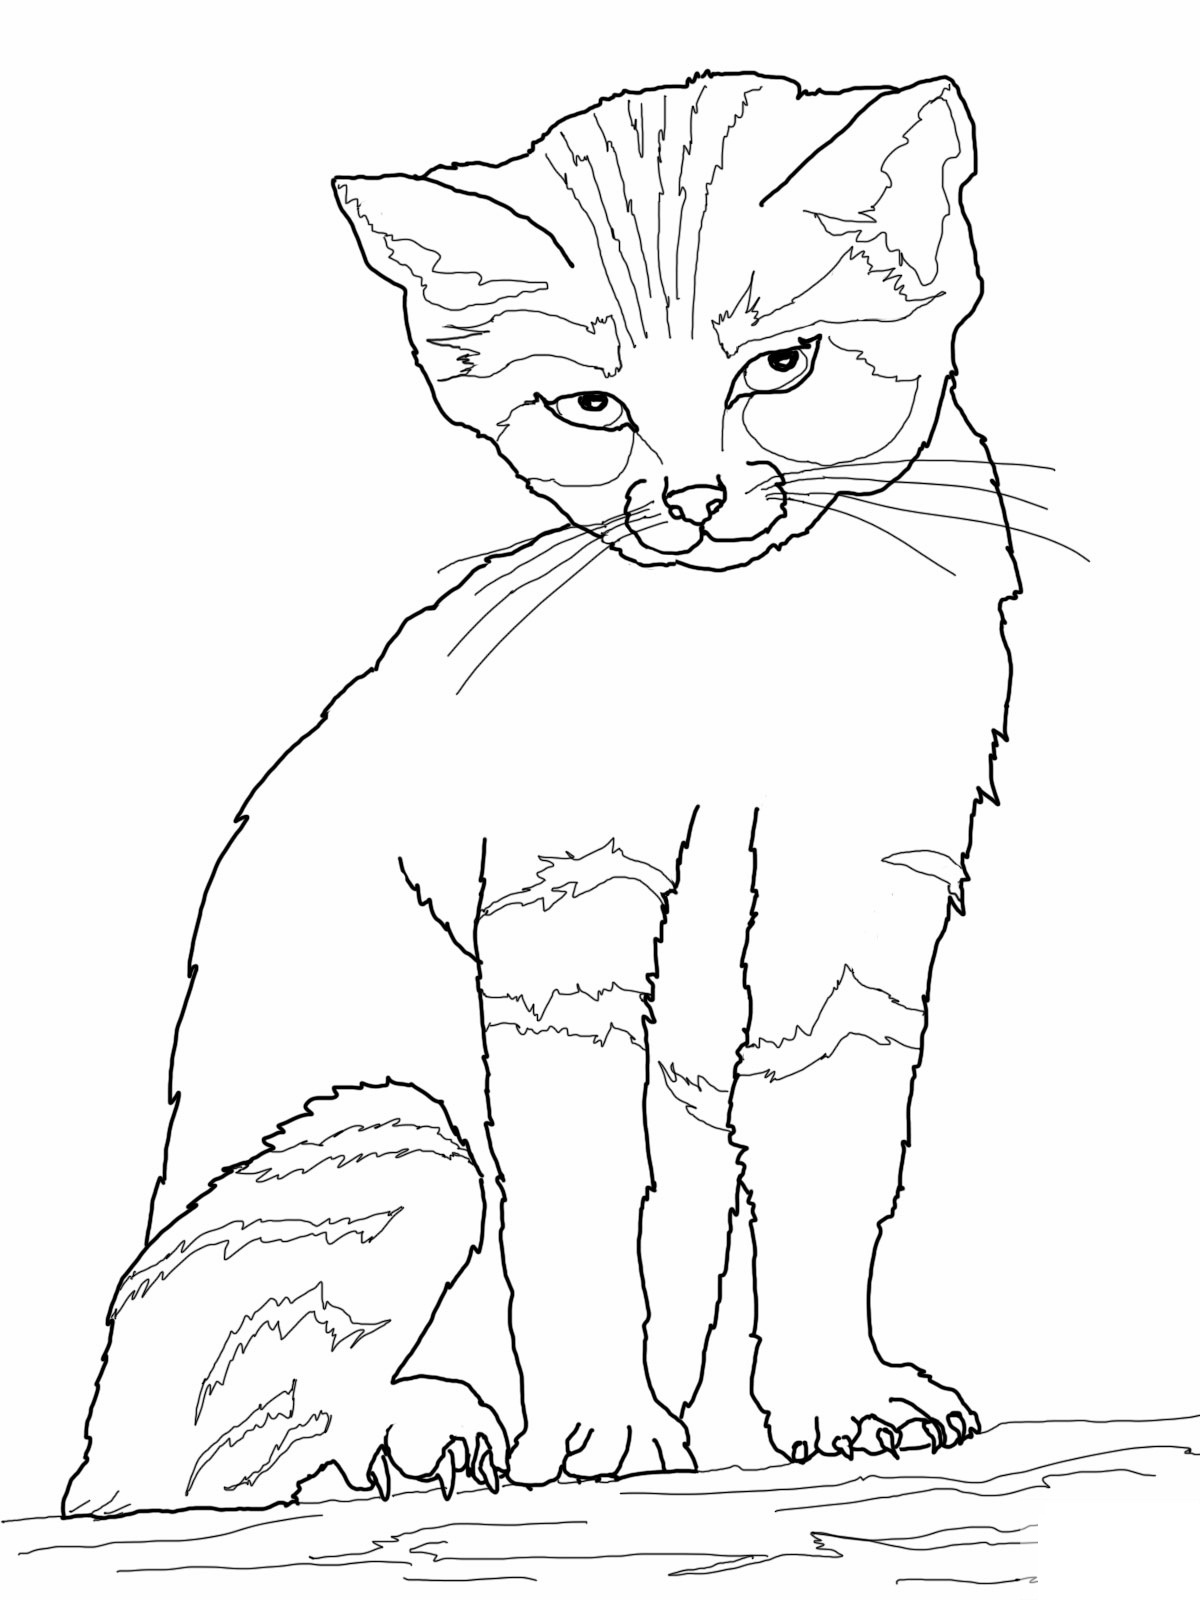 501 Cartoon Free Printable Cat Coloring Pages with Animal character